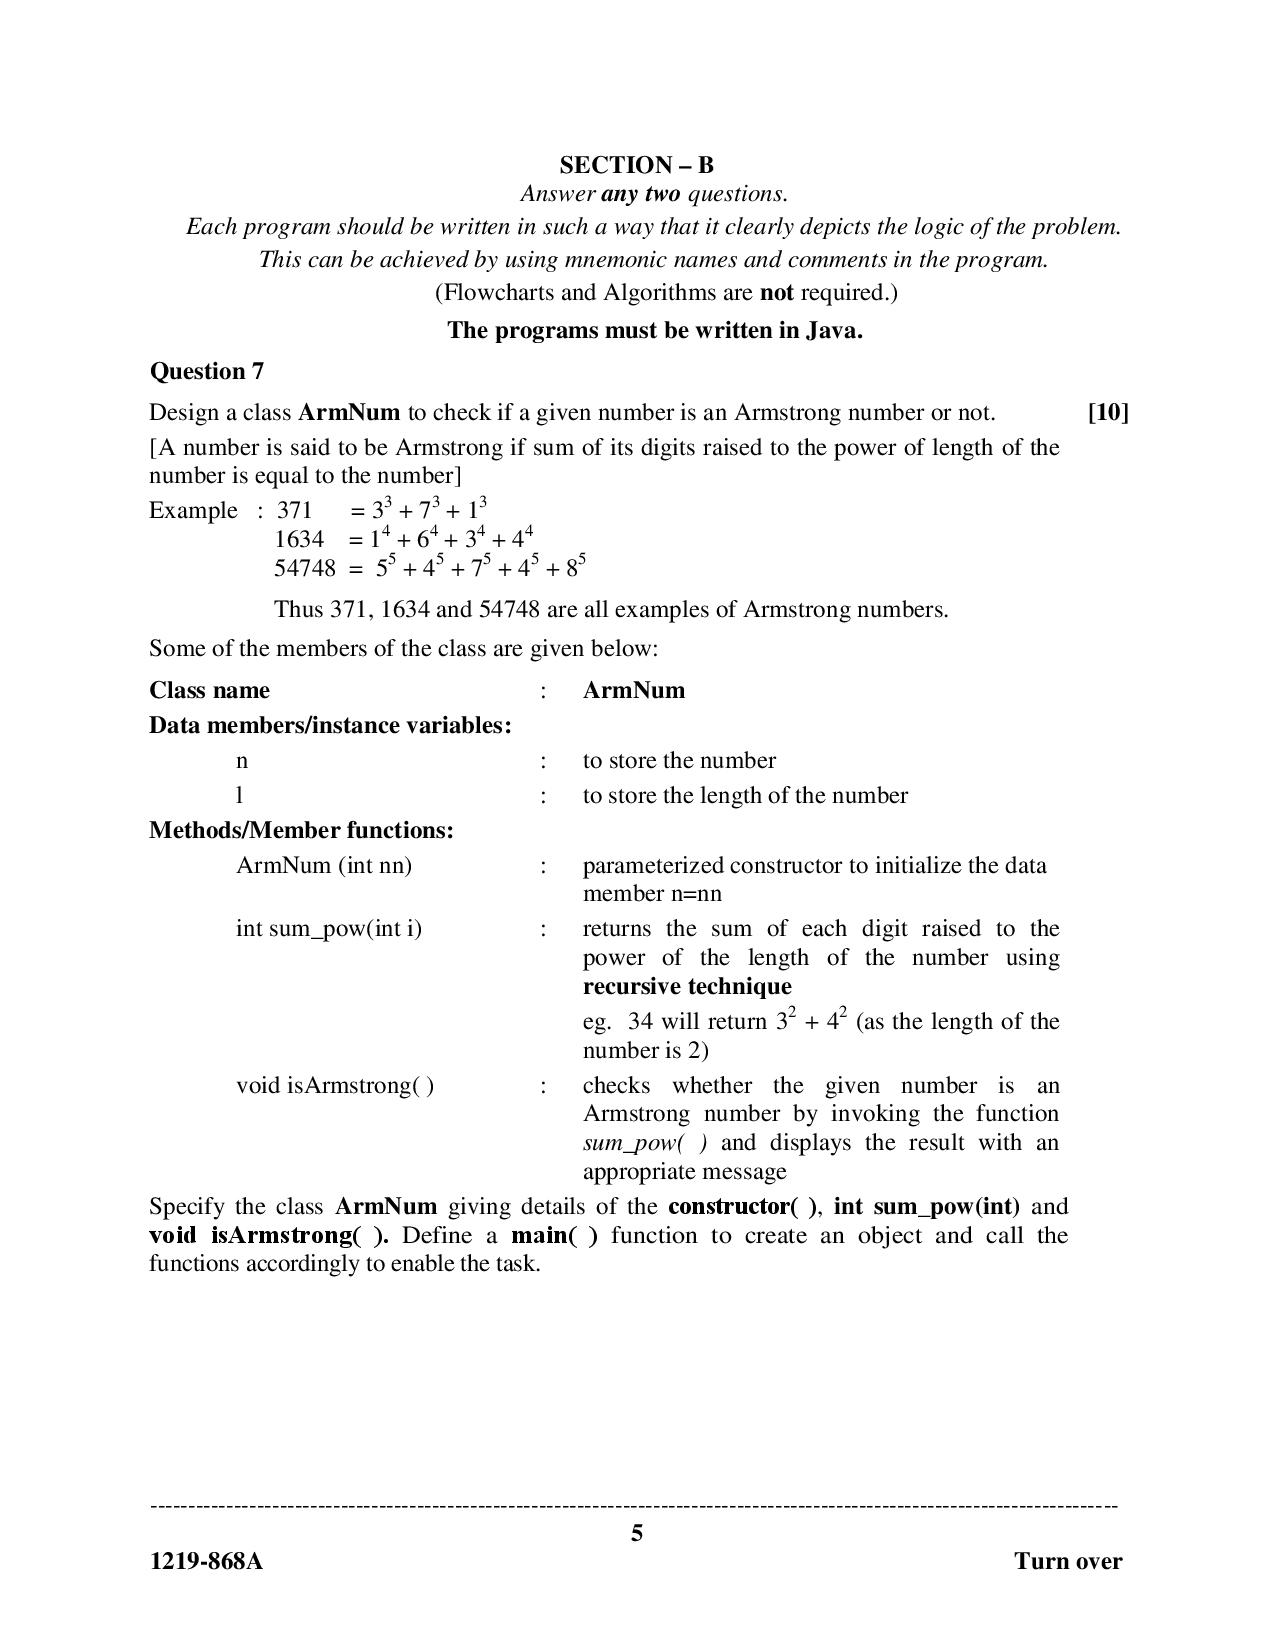 ISC Class 12 Computer Science 2019 Question Paper